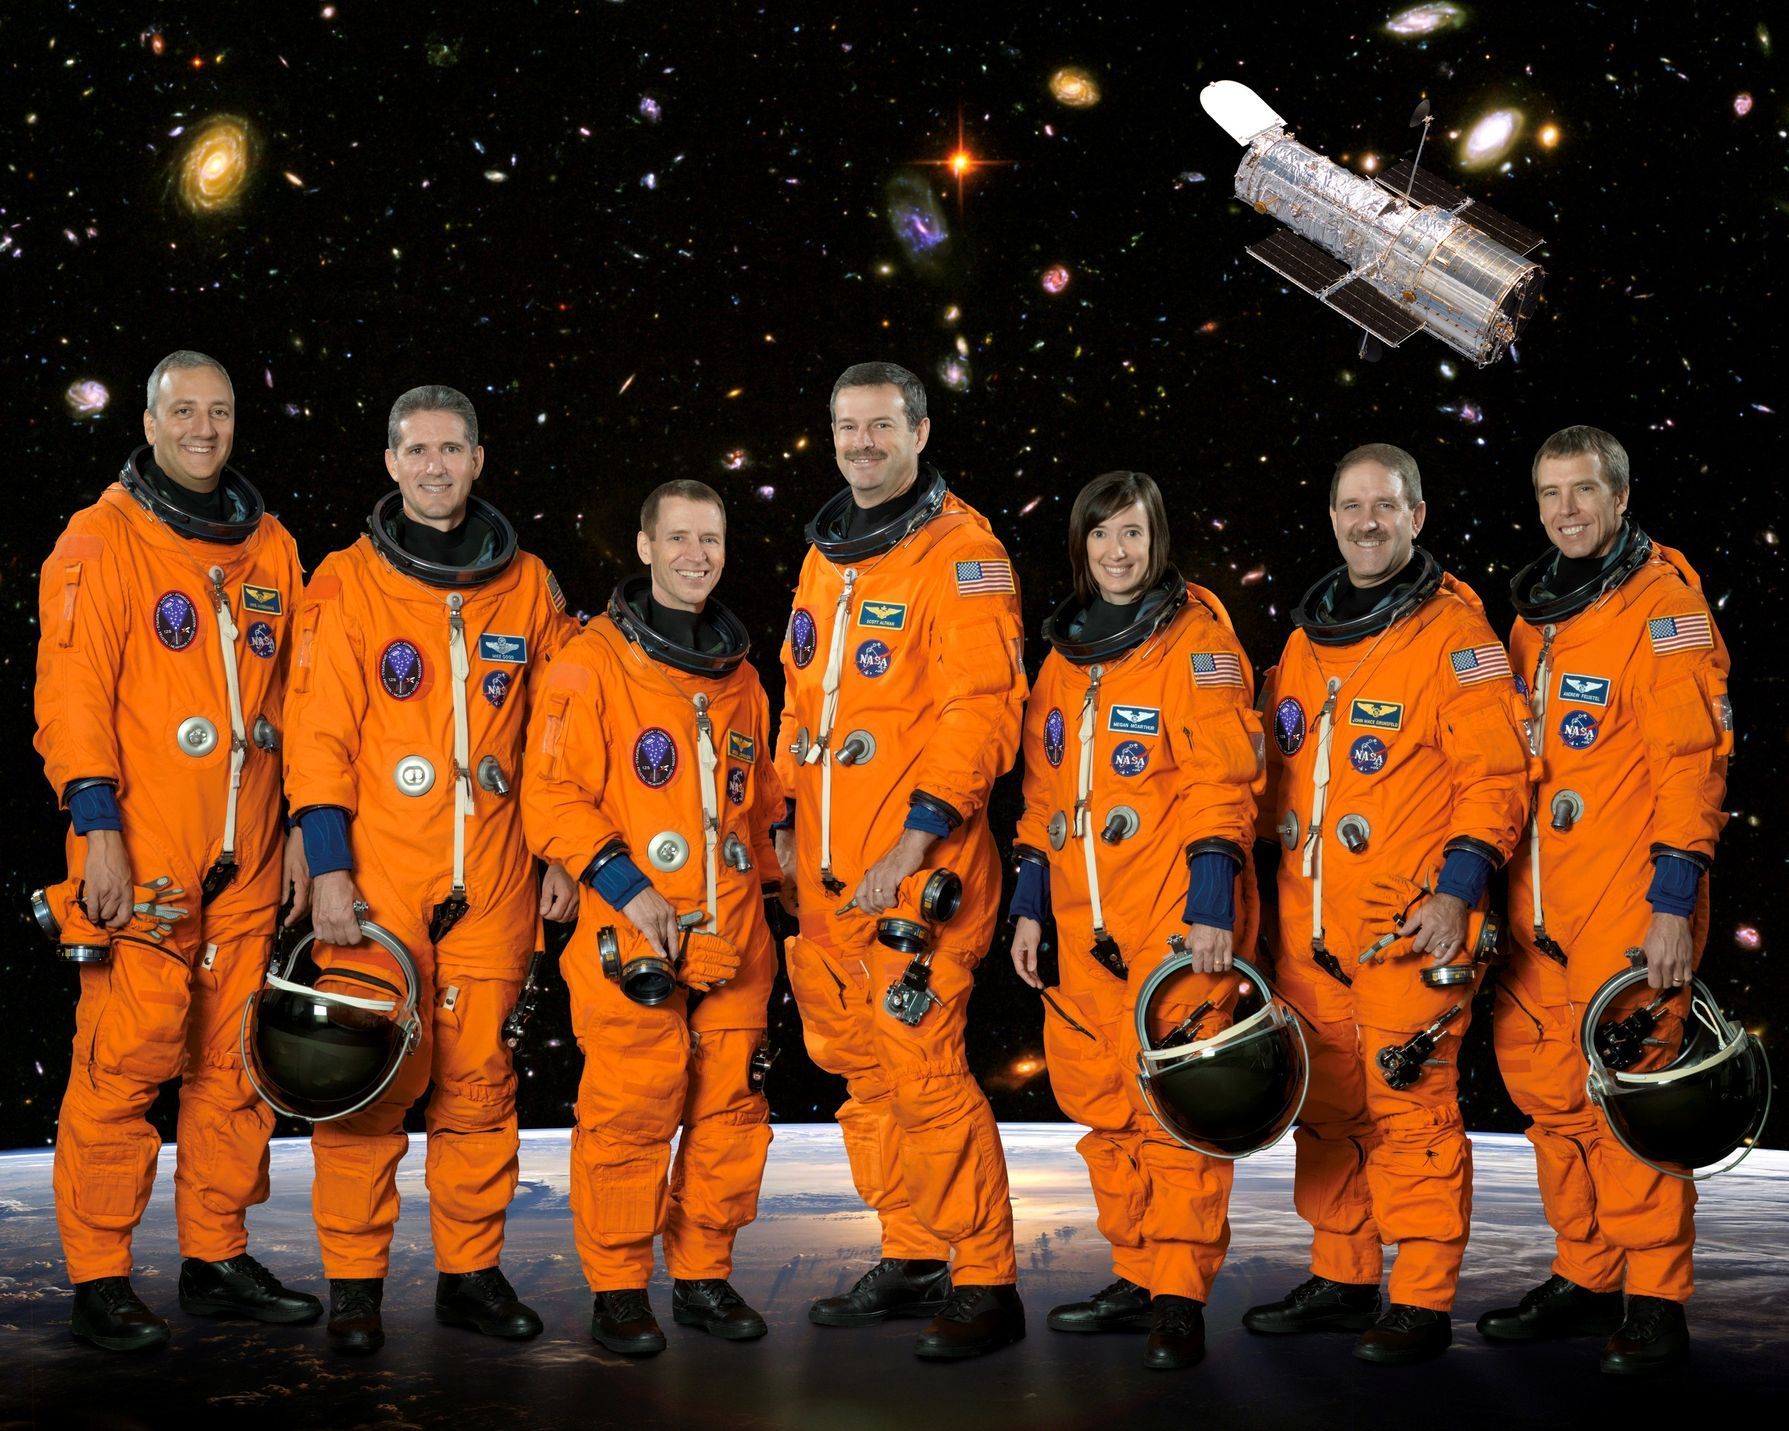 Andrew Feustel - mise STS-125 (2009)